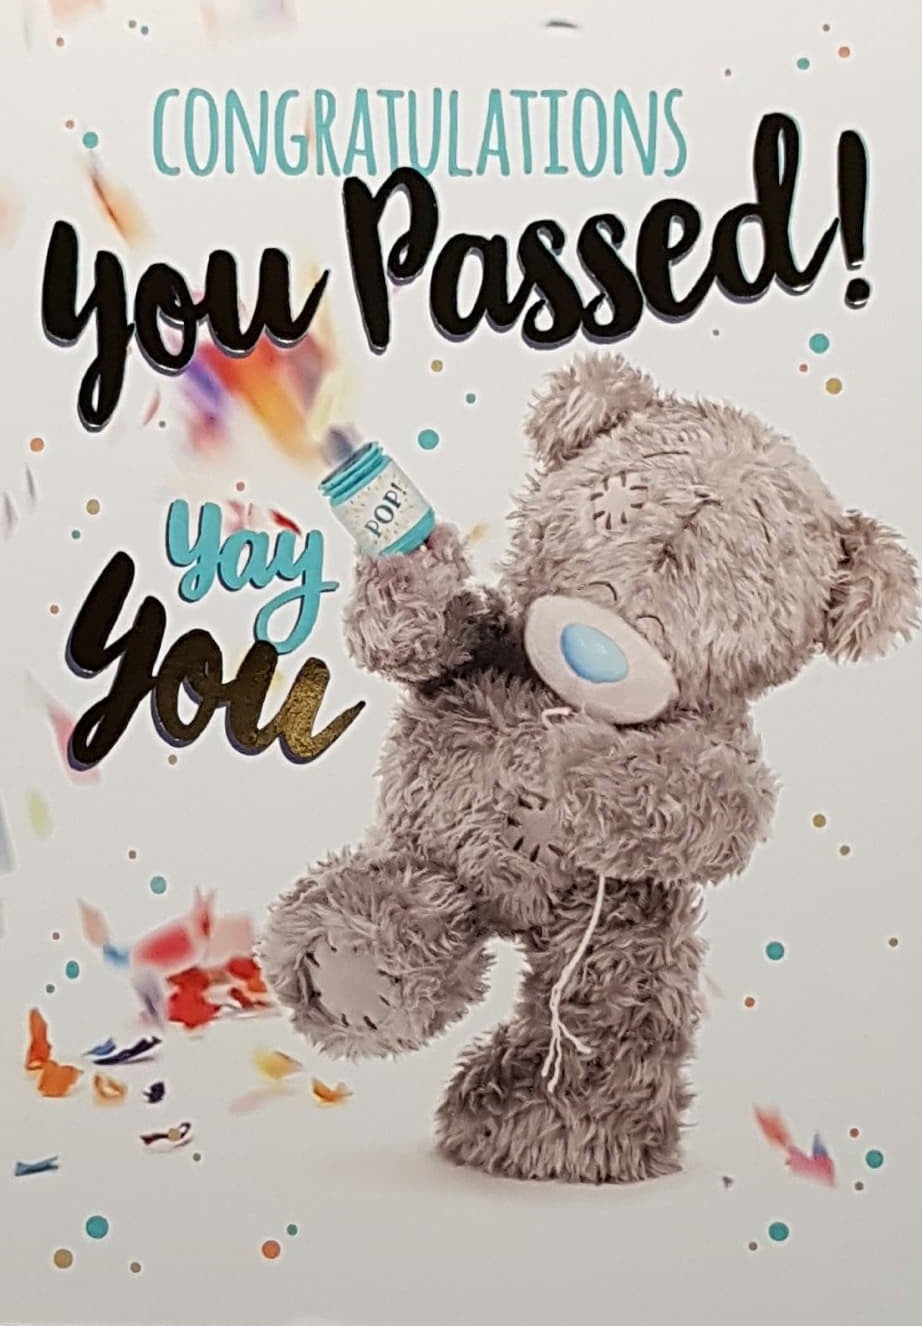 Congratulations Card - You Passed ! Yay !